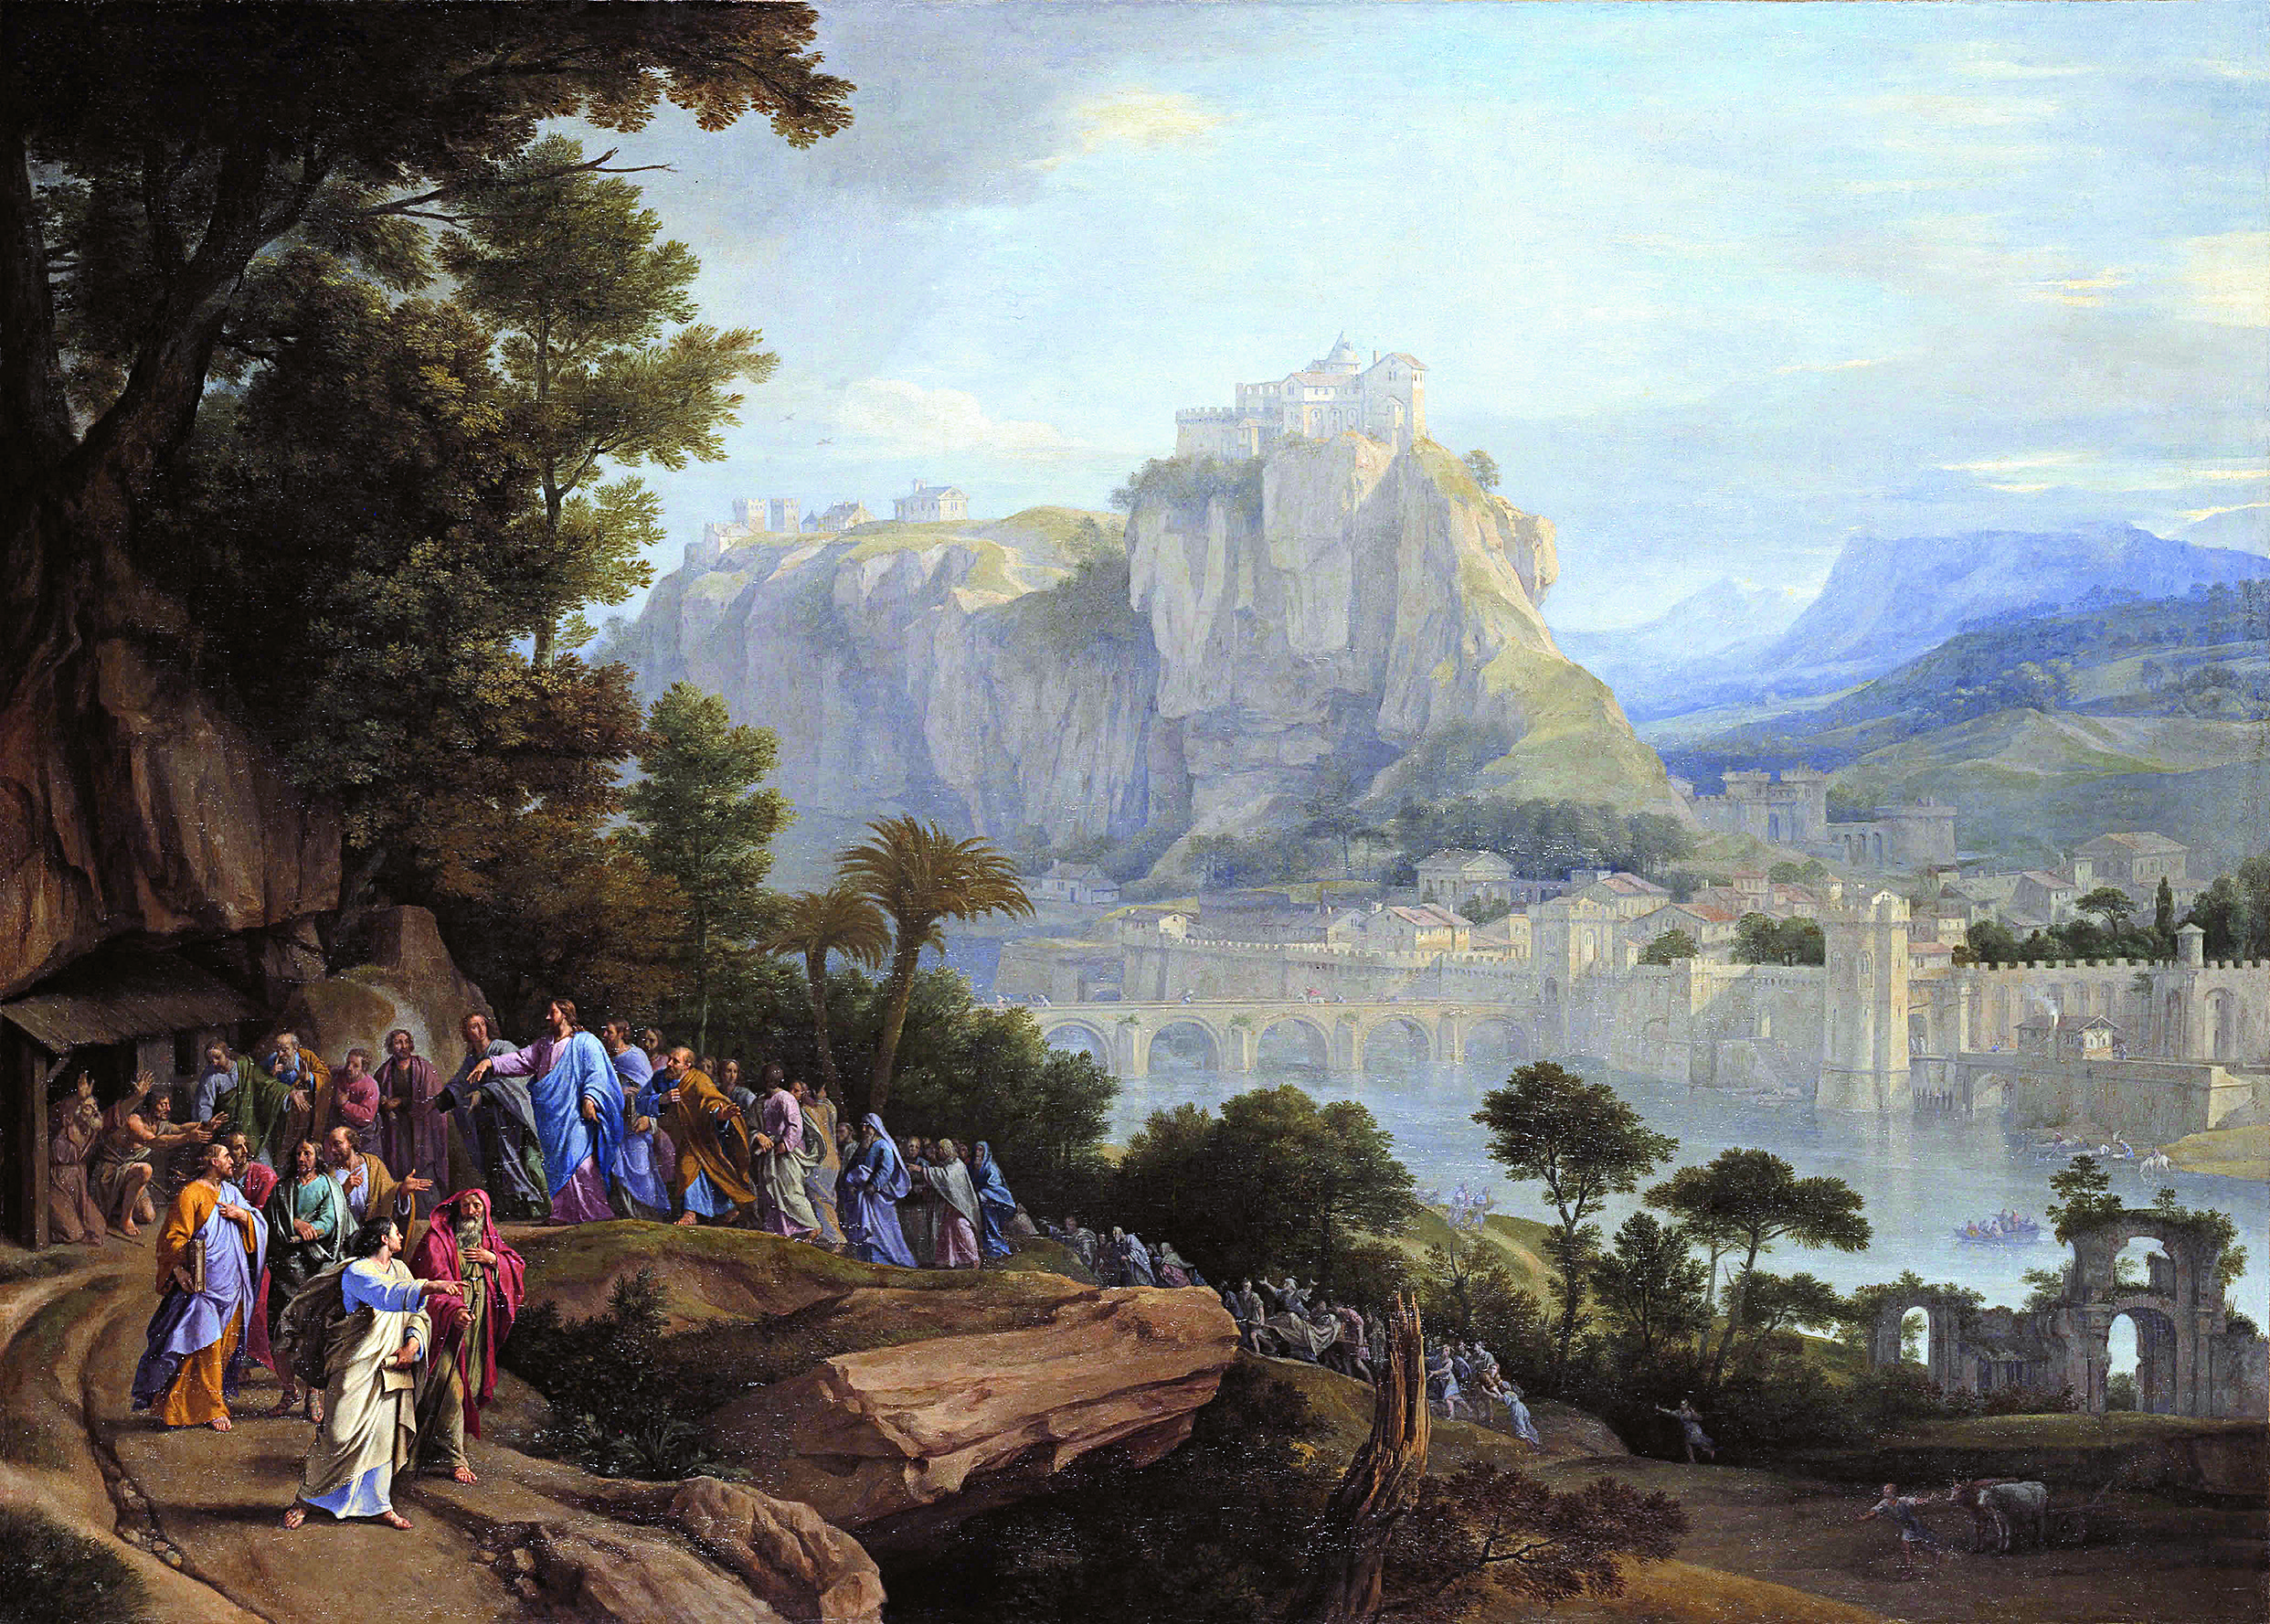 Christ Healing the Blind, painted ca. 1657. Dawn L. Hollis observes: The image depicts the healing of two blind men recounted in Matthew 20:29-34. Their first sight will be of the mountainous vista that dominates the canvas. [Image] Philippe de Champaigne